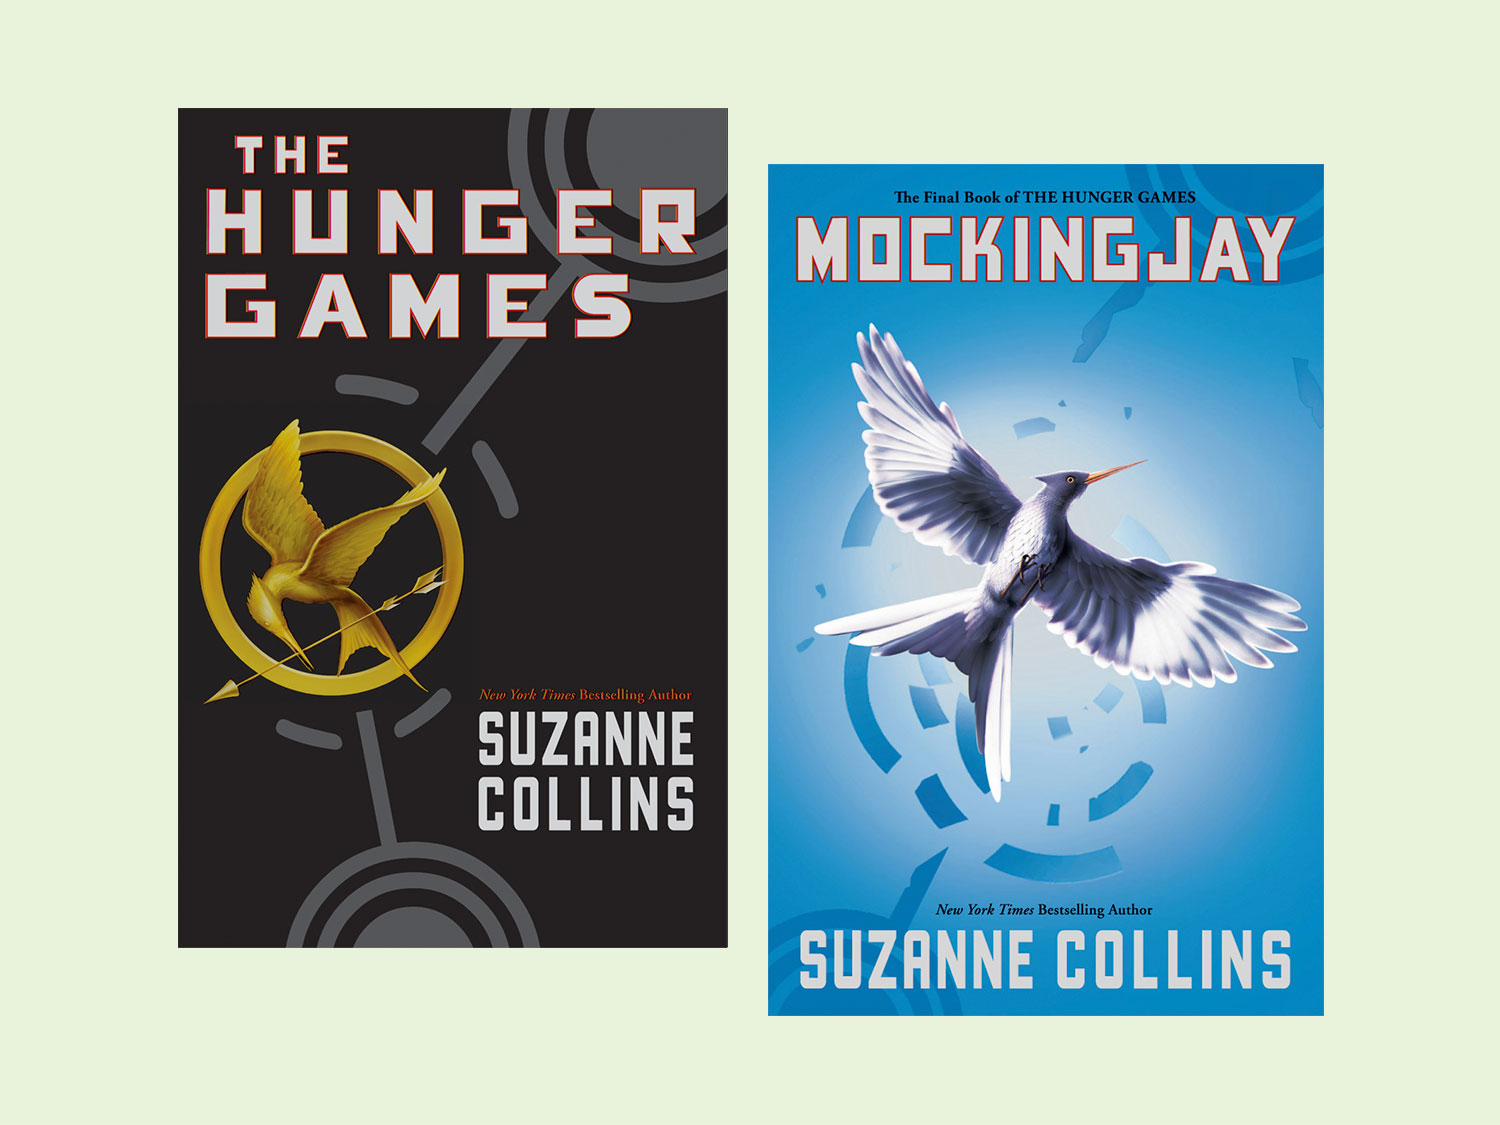 Scholastic Loss Widens as Sales of 'Hunger Games' Trilogy Fall - WSJ